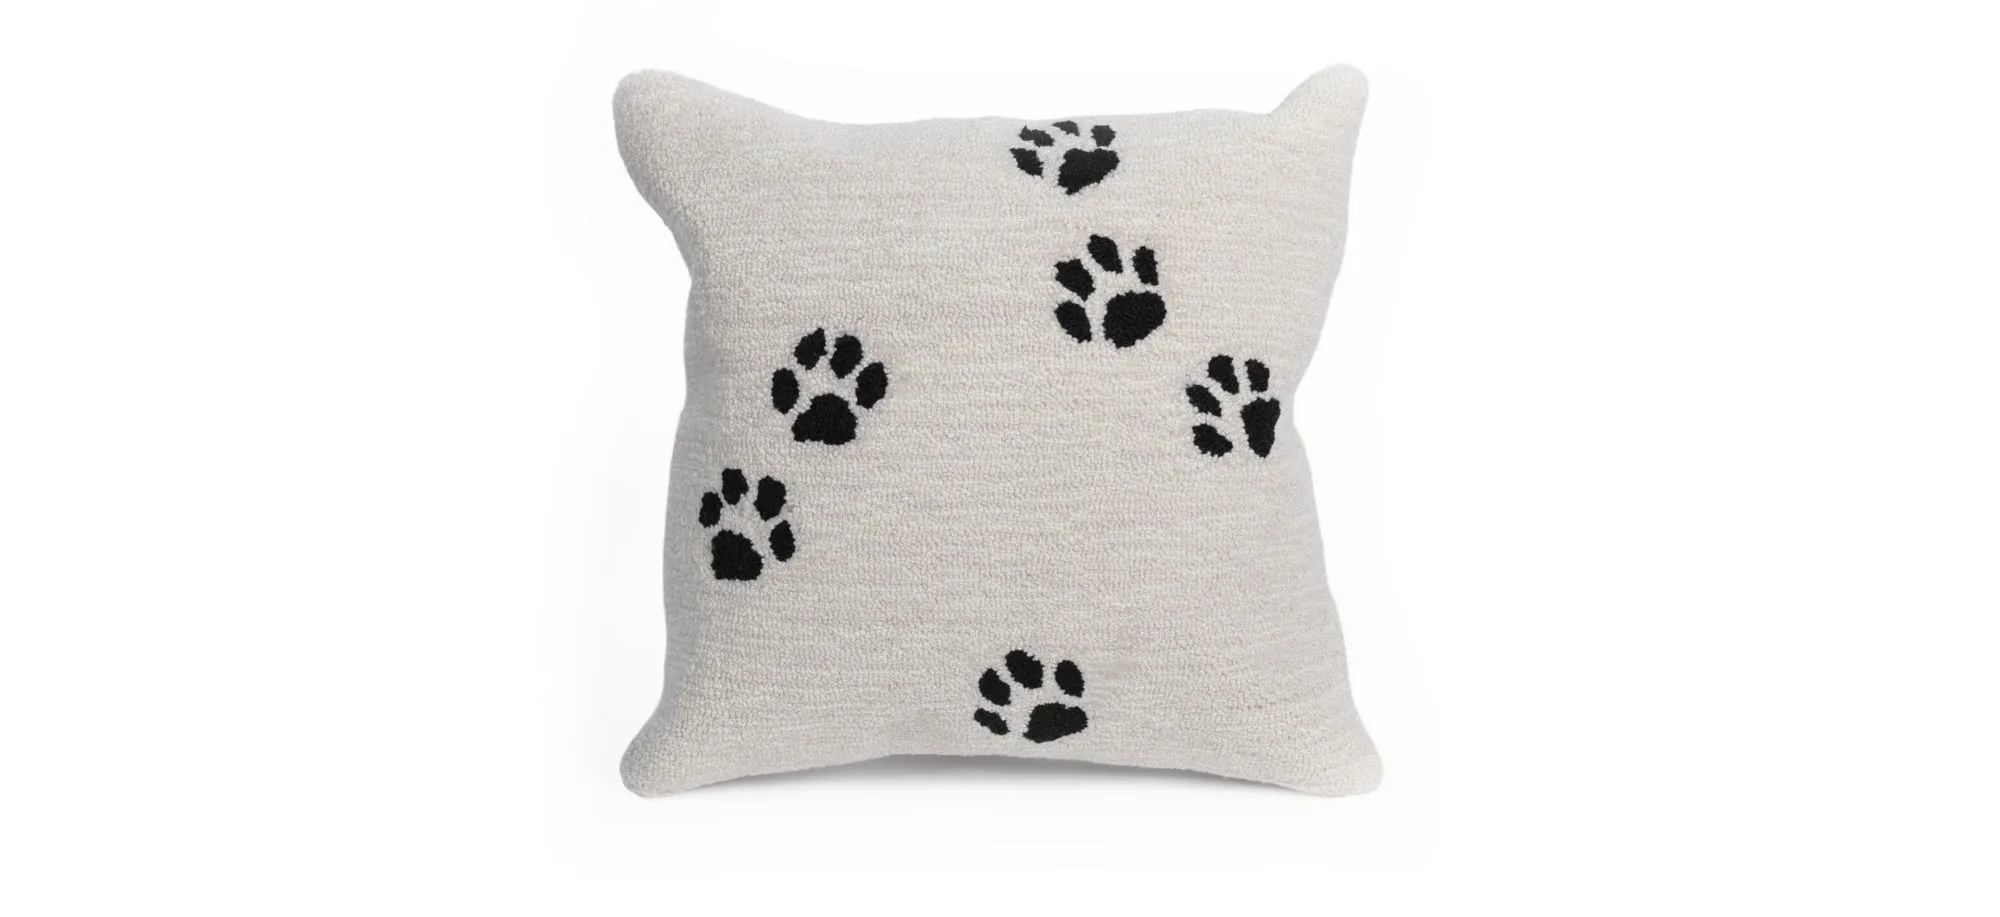 Liora Manne Frontporch Paw Prints Pillow in Natural by Trans-Ocean Import Co Inc